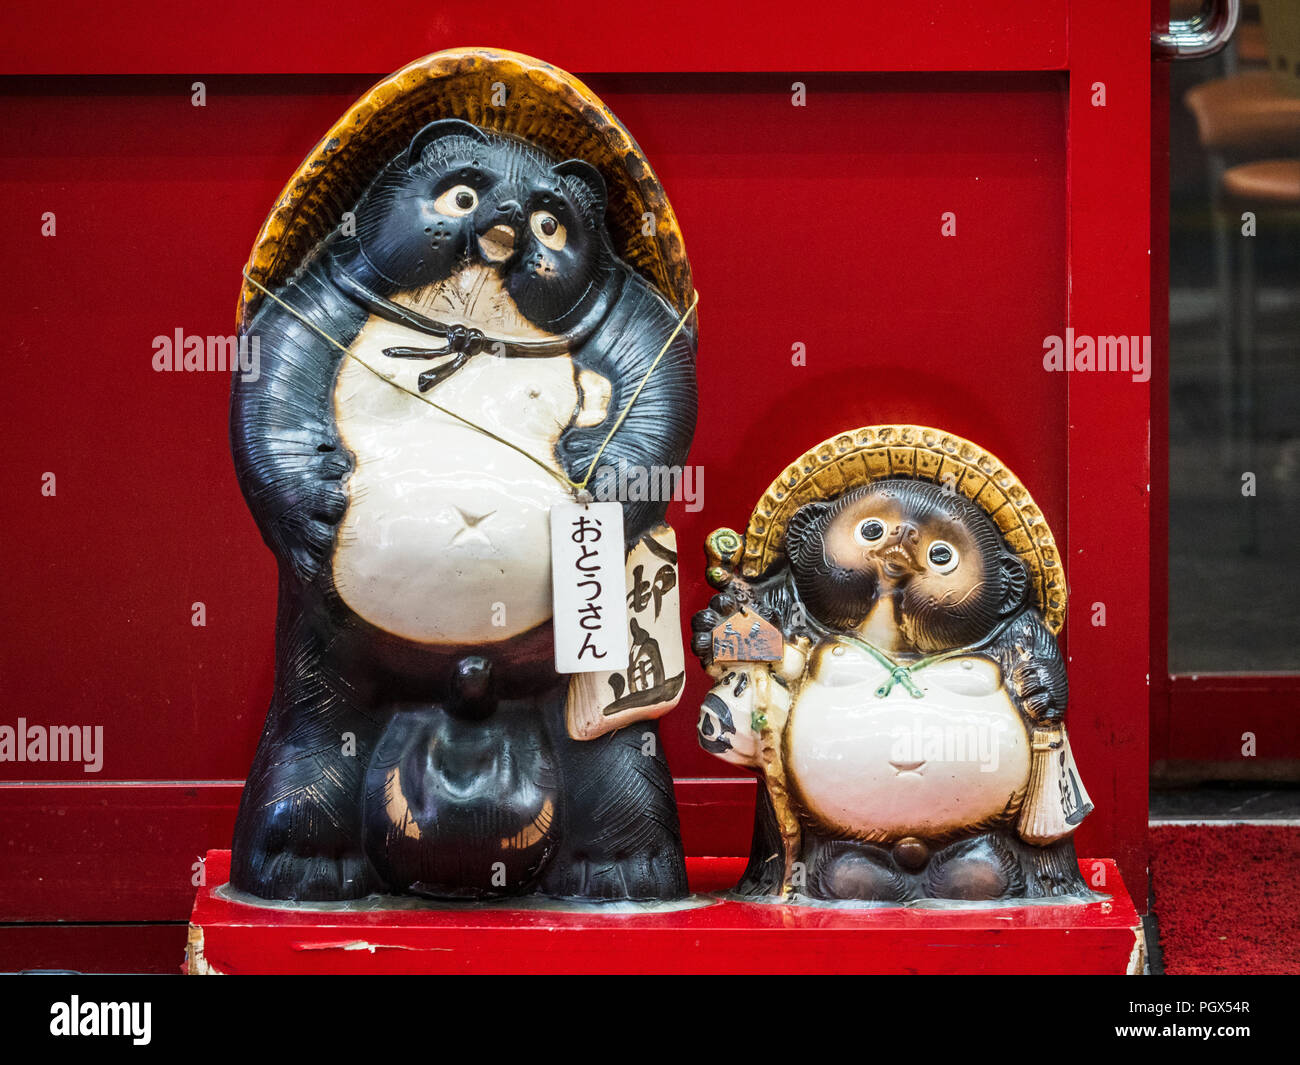 Japanese Raccoon Dog statue in Hokkaido - also known as Tanuki or mangut the statues of the Raccoon Dogs are meant to bring good fortune in Japan. Stock Photo